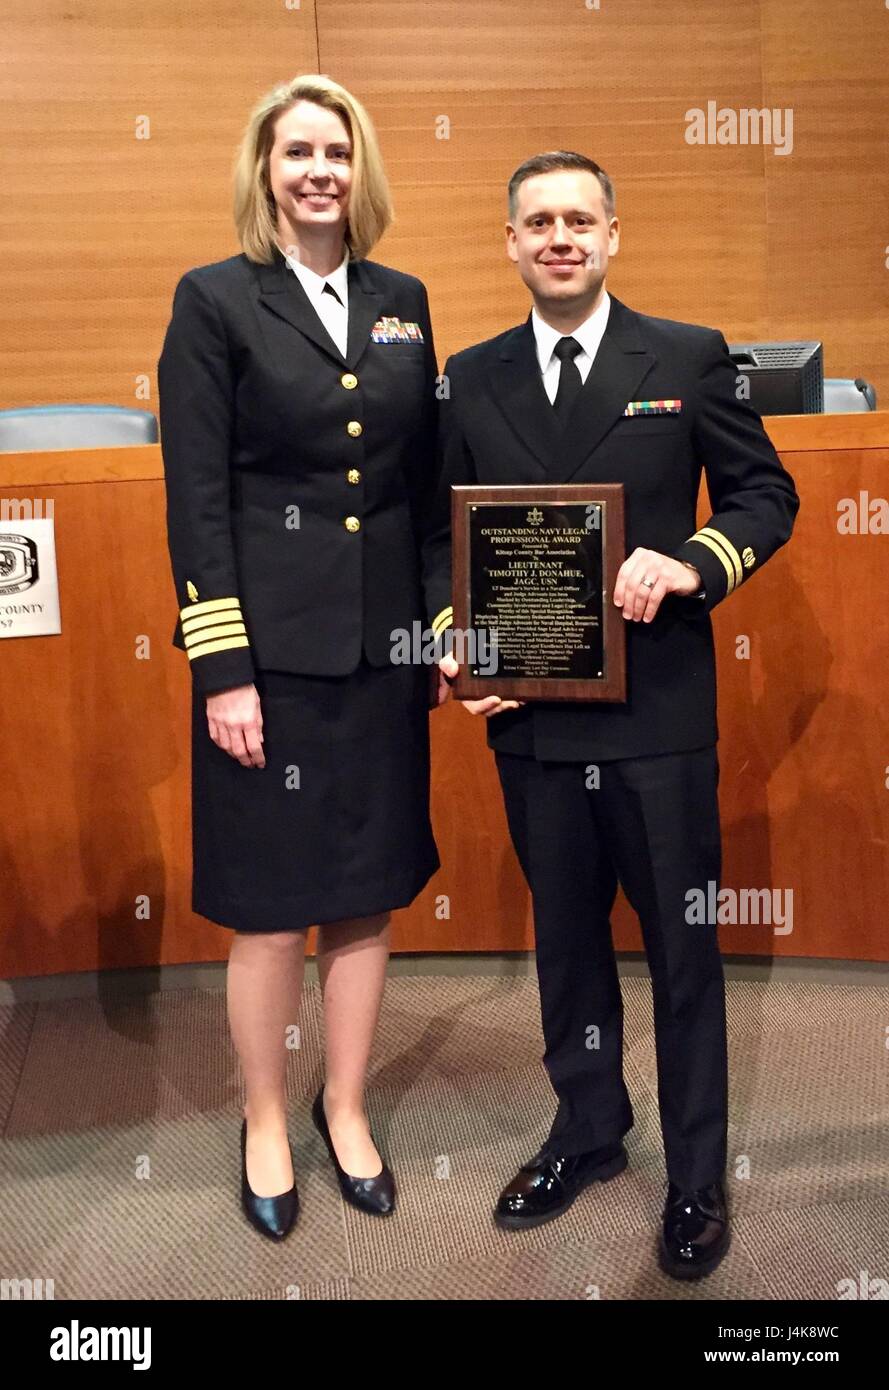 For a judicial job well done...Lt. Timothy J. Donahue, Judge Advocate  General Corps, accepts thanks from Capt. Kim Zuzelski, Naval Hospital  Bremerton Executive Officer, upon receiving the 'Outstanding Navy Legal  Professional Award' from the Kitsap County Bar Association on May 5, 2017  (Courtesy photo). Stock Photo